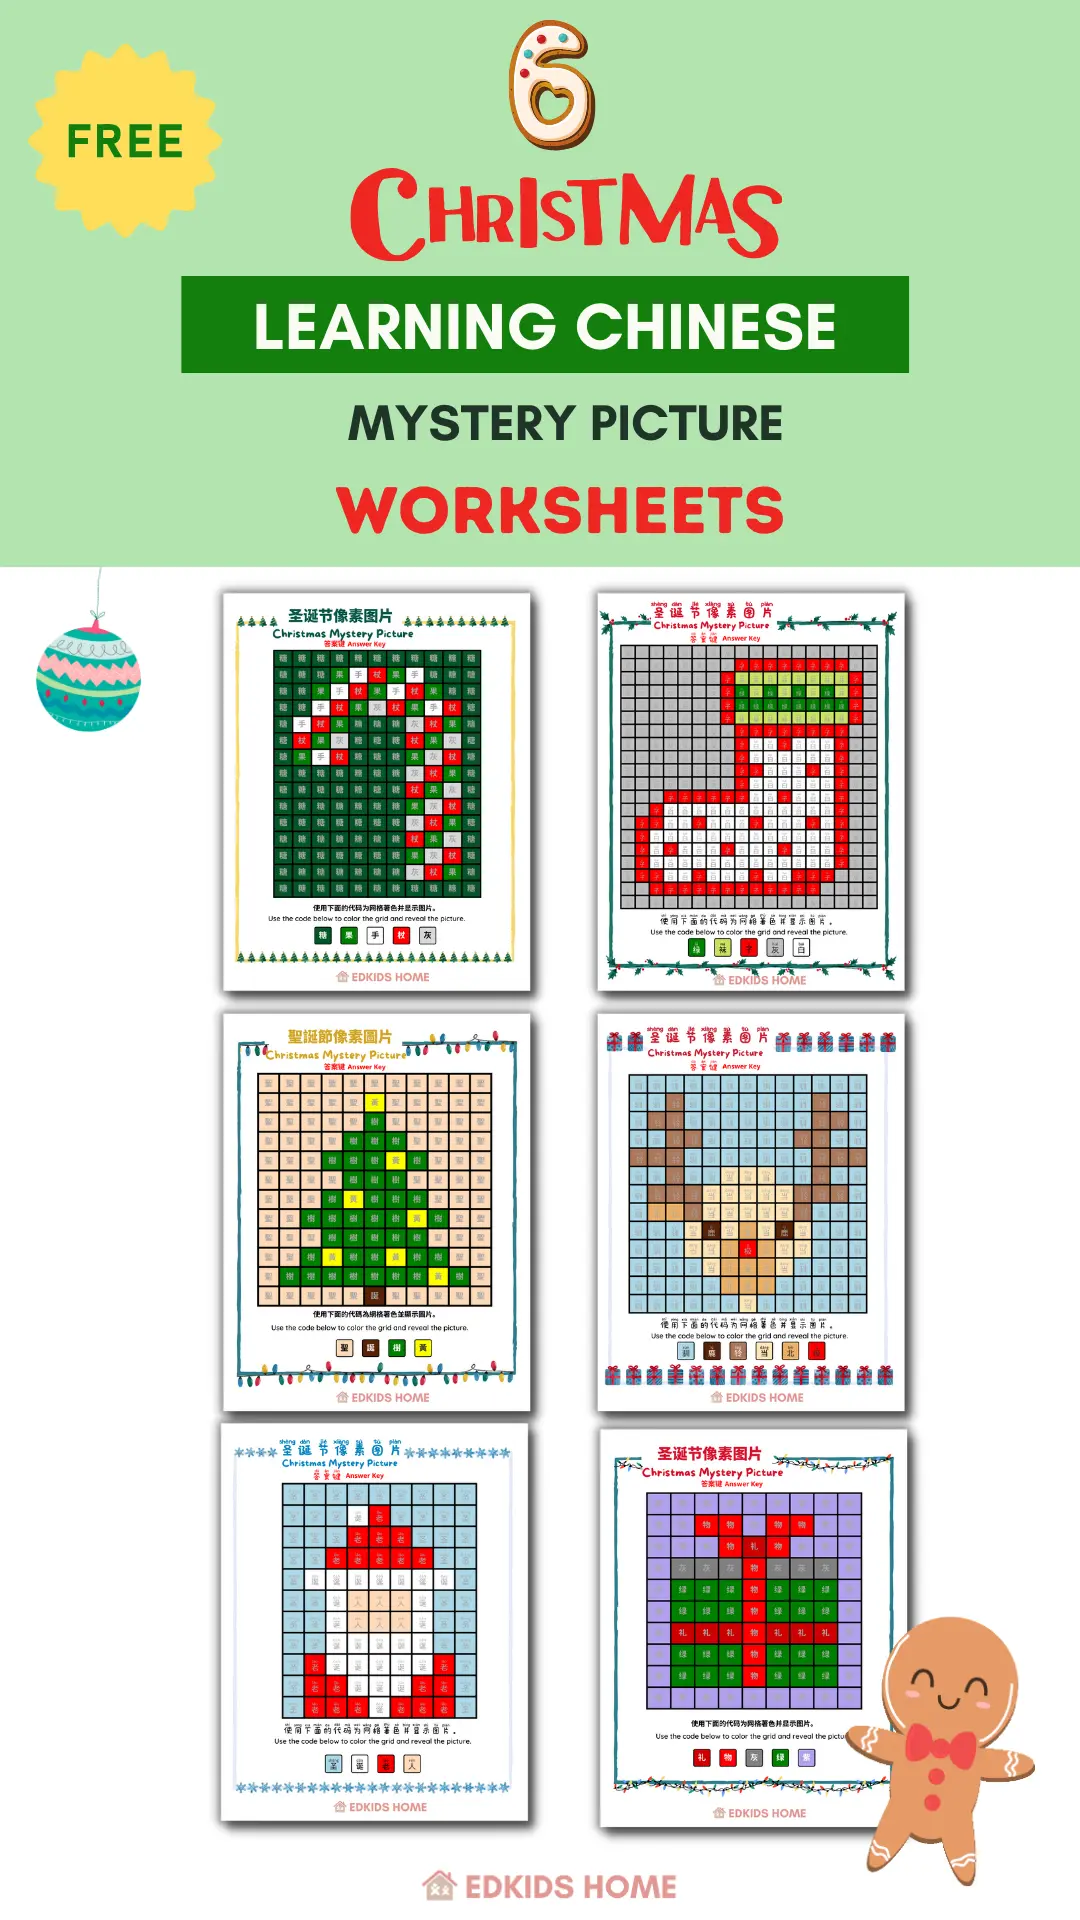 6 FREE Christmas Learning Chinese Mystery Picture Worksheets